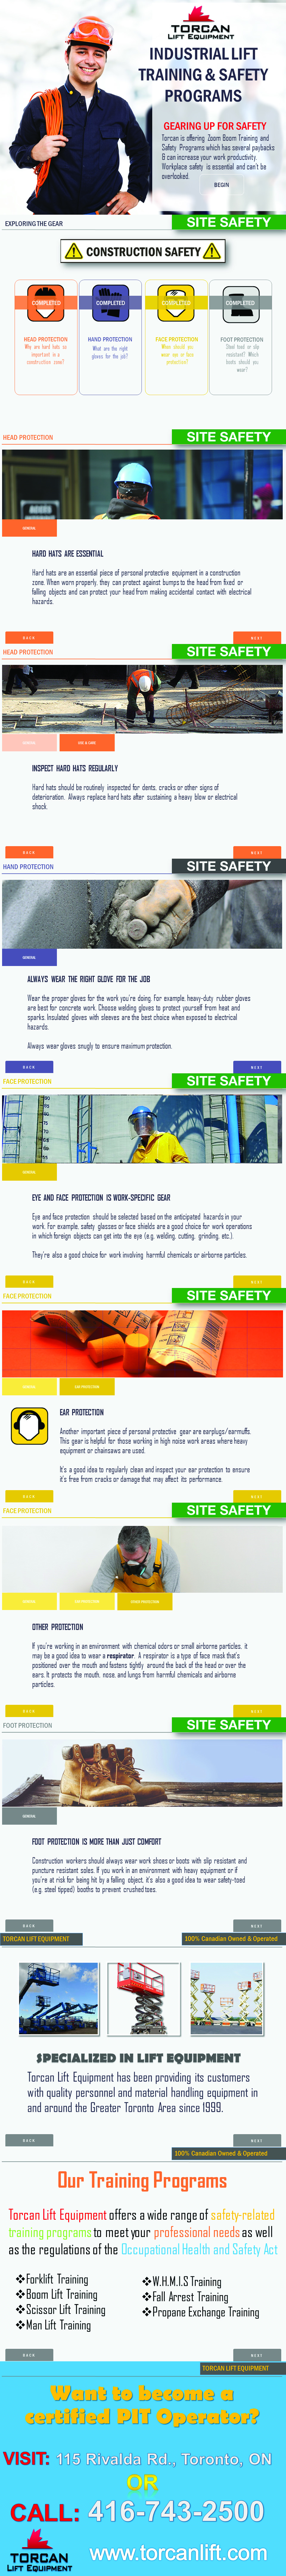 INDUSTRIAL LIFT TRAINING & SAFETY PROGRAMS INFOGRAPHIC